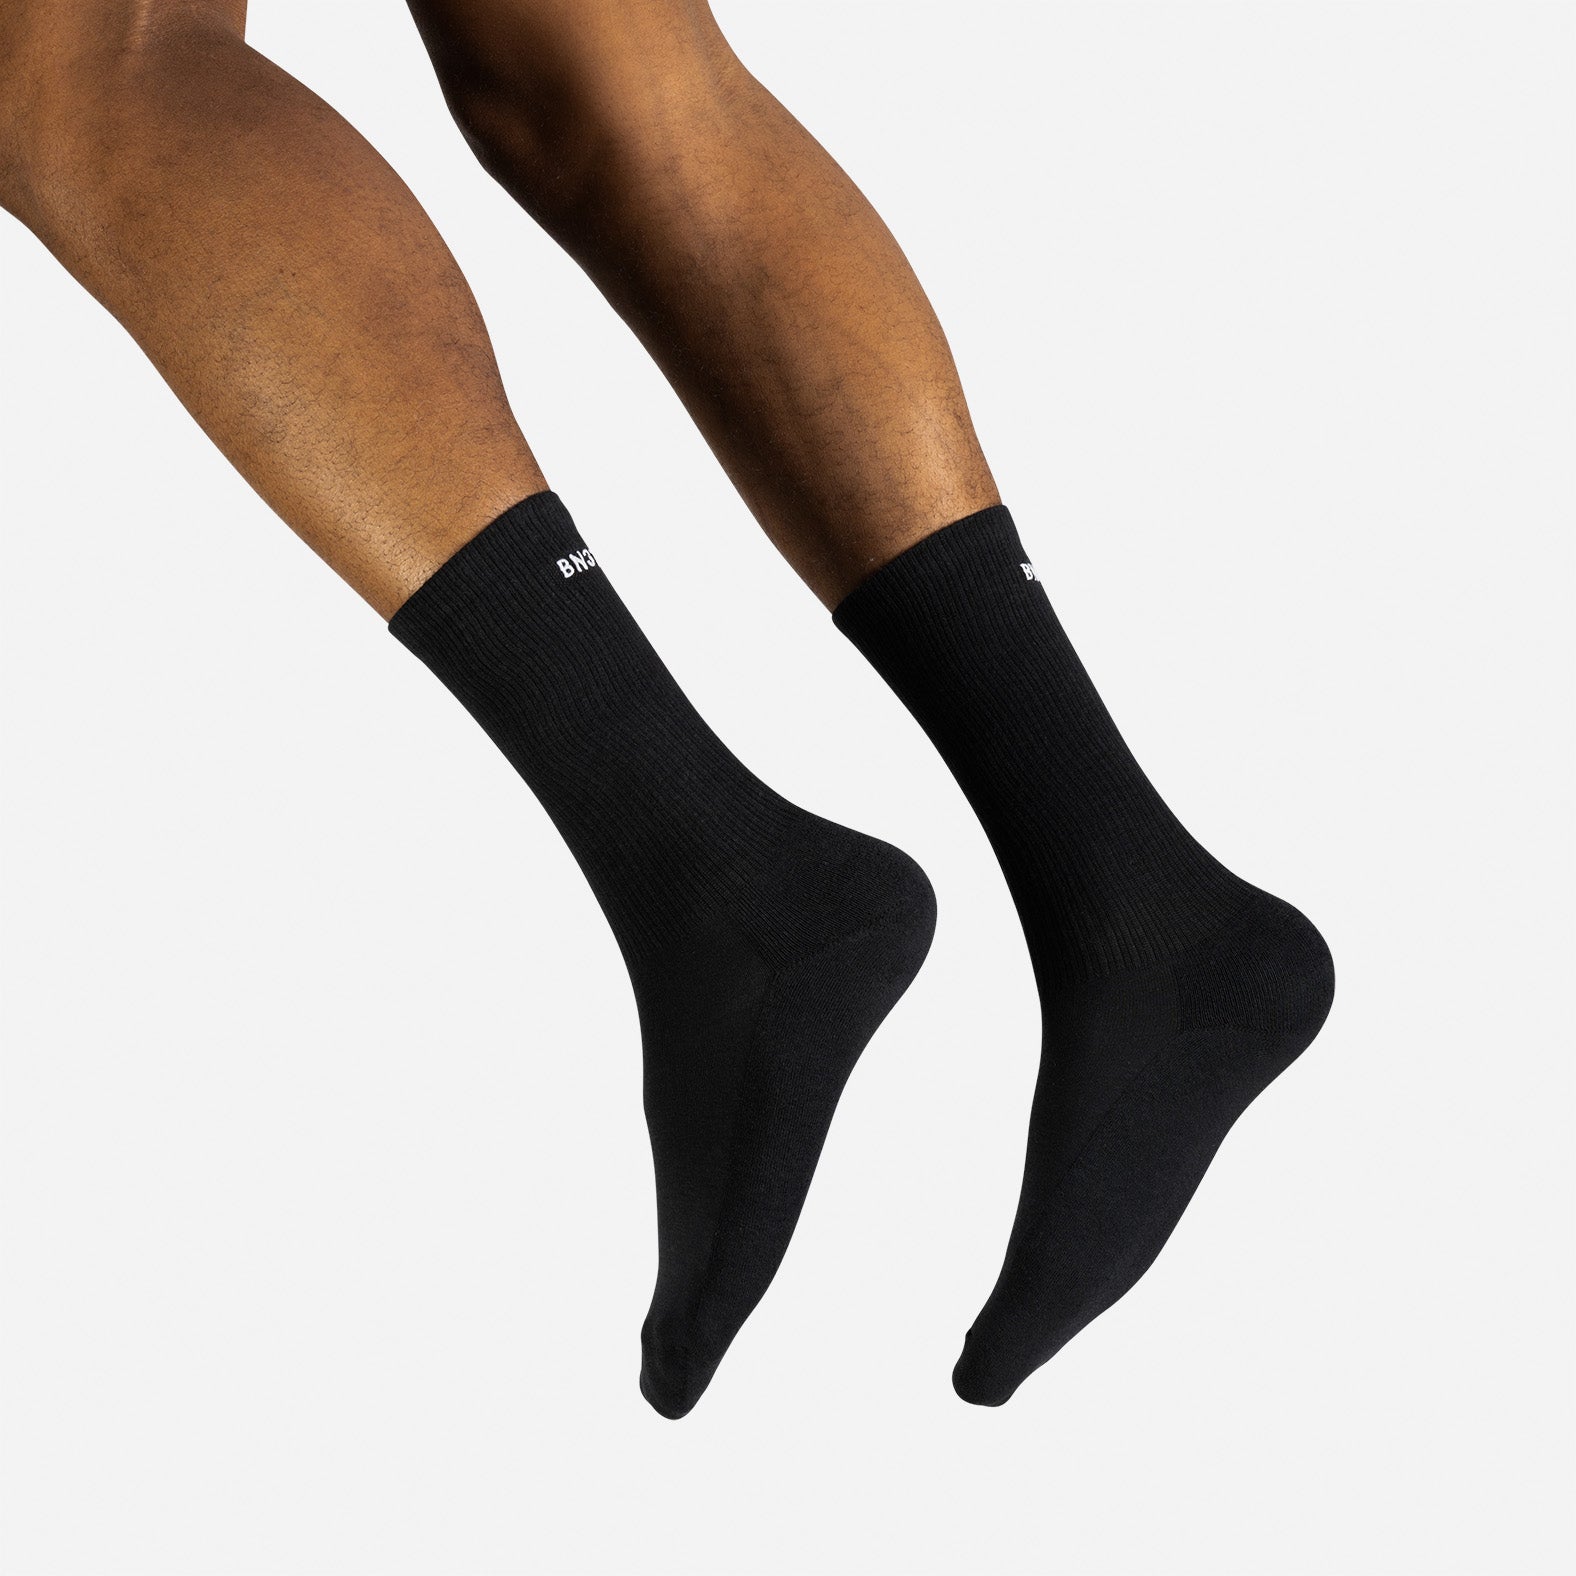 Black Socks - Black Crew Socks For Daily Use - GoWith